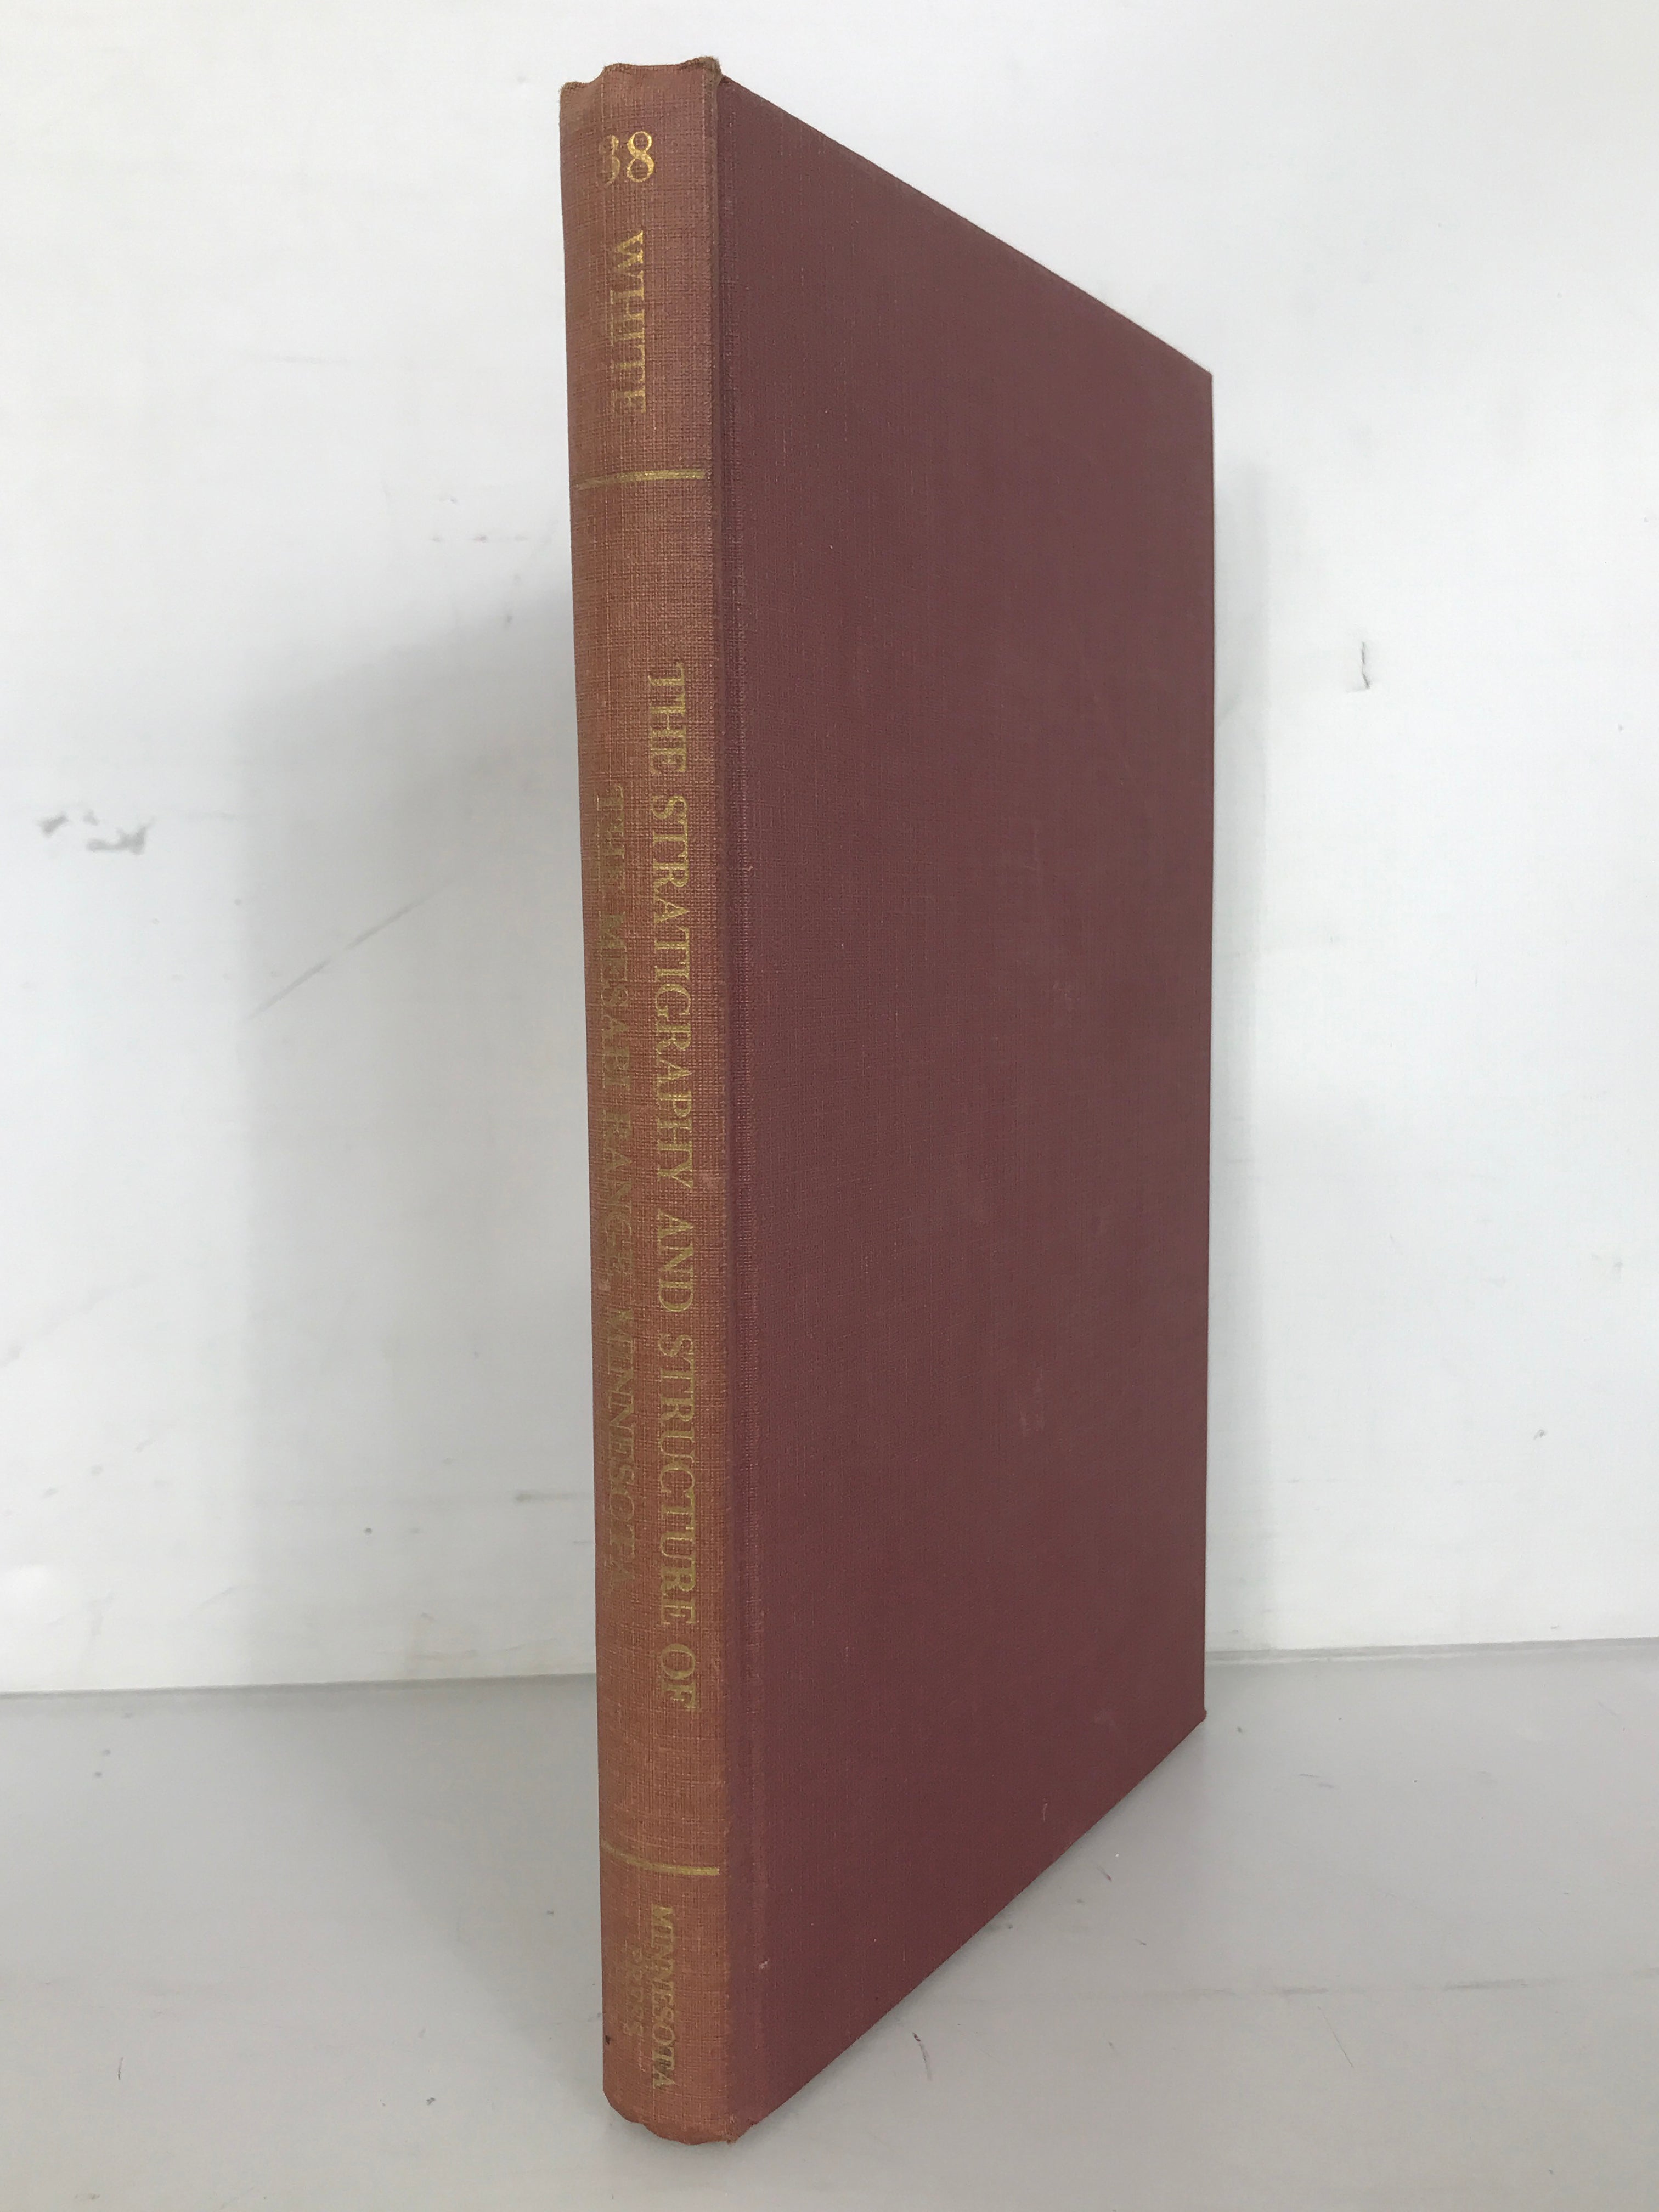 Minnesota Geological Survey Bulletin 38: The Stratigraphy and Structure of the Mesabi Range by David A. White 1954 HC